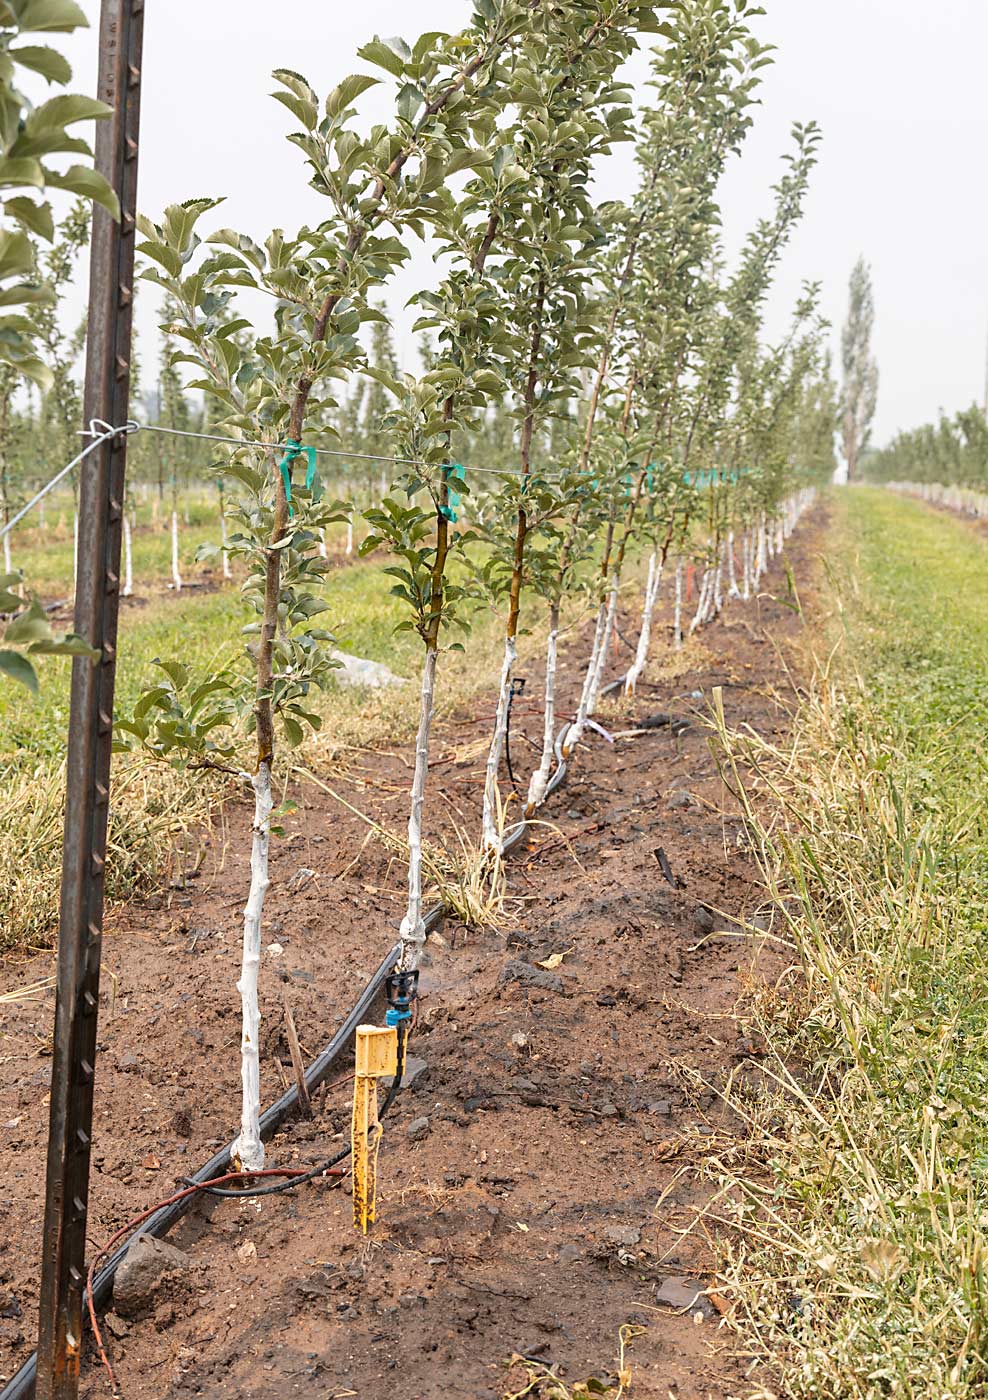 After losing many acres of peaches in 2021, Williams moved quickly to replace them with high-density apples, including Honeycrisp, Ambrosia and cider-specific varieties. He and his crew planted 100,000 trees last spring, as quickly as they could get them, and returned later in the season to install the trellis. (Kate Prengaman/Good Fruit Grower)